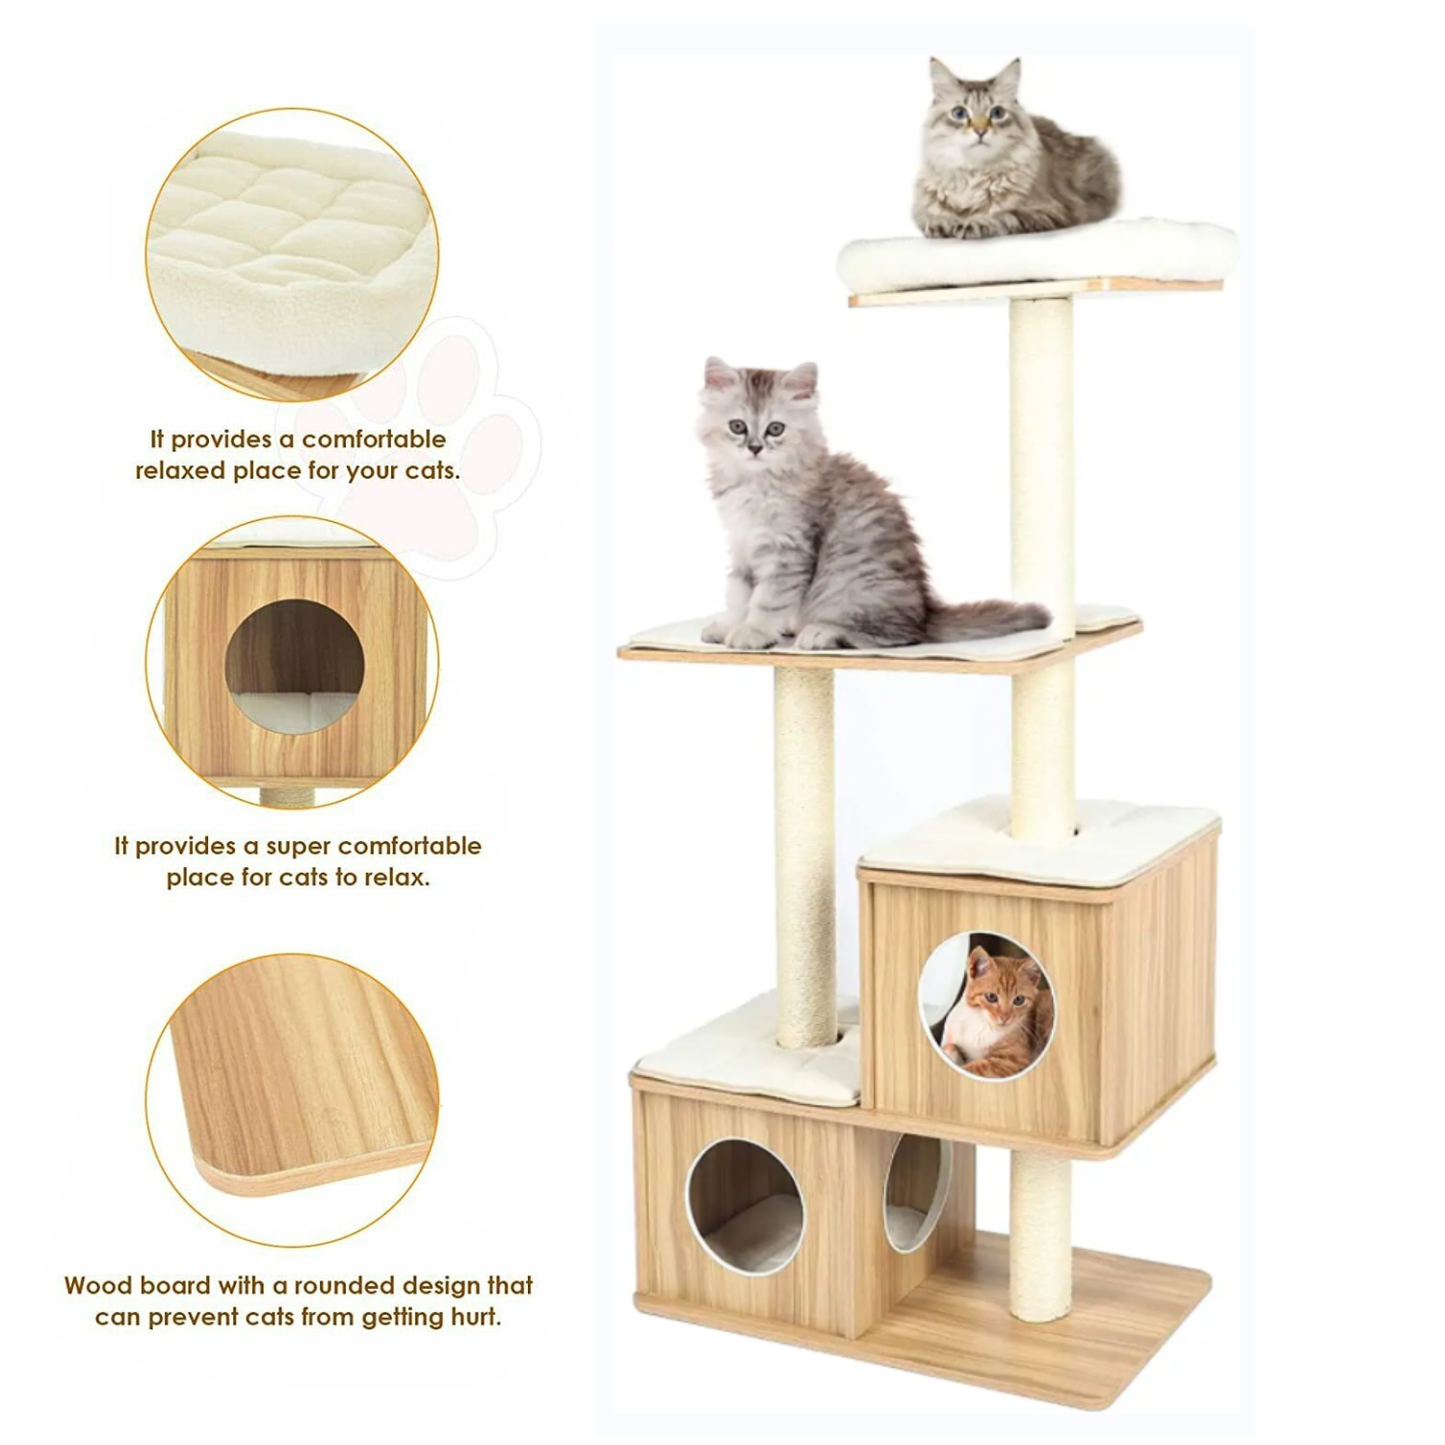 Arlopu Modern Wooden Cat Tree Tower, Large Cat Condo Furniture with Multi-Layer Platform, 55.6" Tall Cat Climbing Stand House with Sisal Scratching Post, Washable Plush Cushion for Kittens / Large Cats